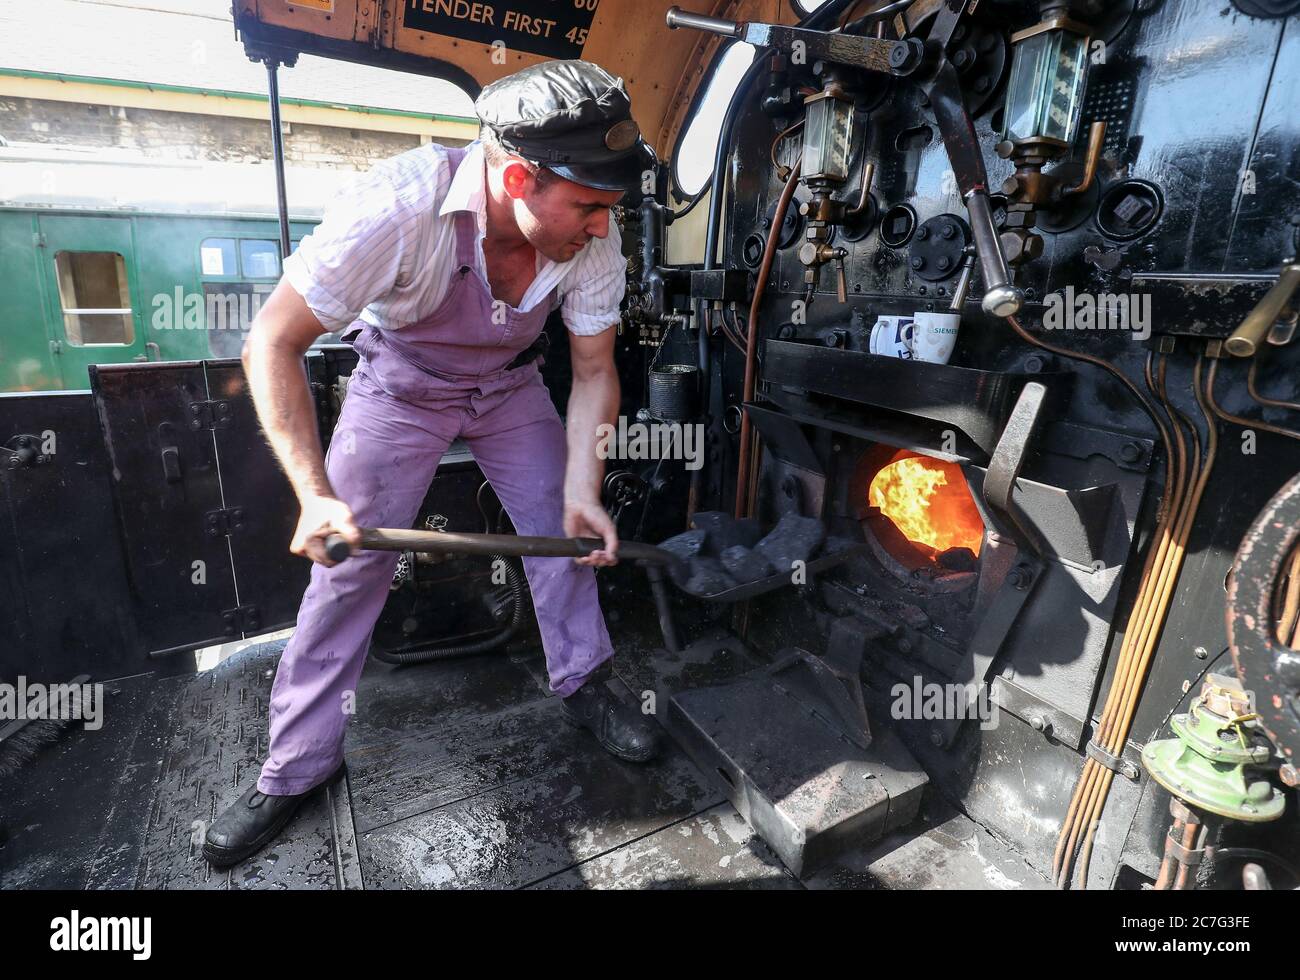 Fireman Alexander Atkins shovels coal into the firebox of the SR U Class steam locomotive No. 31806, as final preparations are made at the Swanage Railway ahead of the running of steam trains for the first time since the coronavirus lockdown in March. The heritage railway on the Isle of Purbeck, Dorset, will use steam engines again on Saturday with a non-stop service between Swanage and Norden stations with social distancing in place at stations and on trains and the wearing of face coverings. Stock Photo